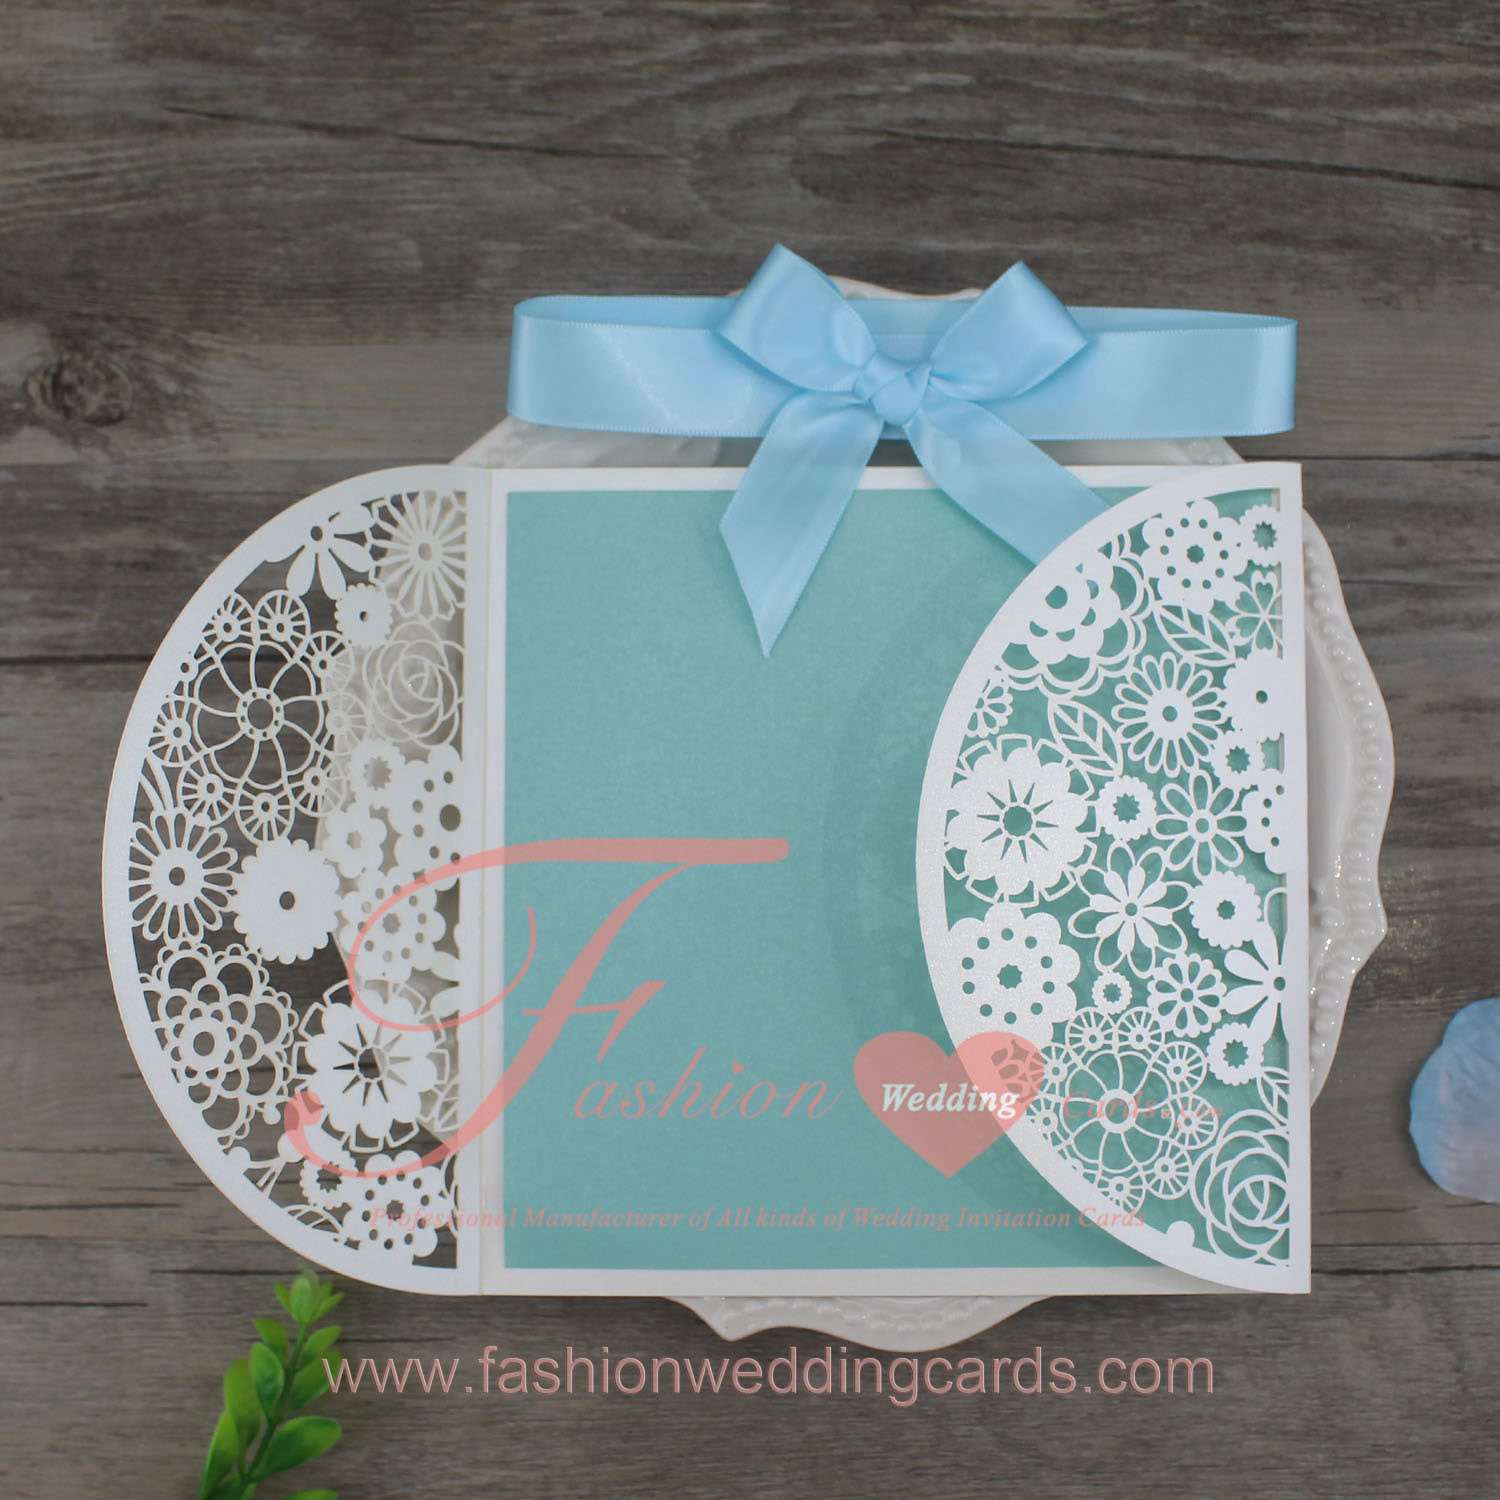 Personalized Lace Laser Cut Wedding Invitations